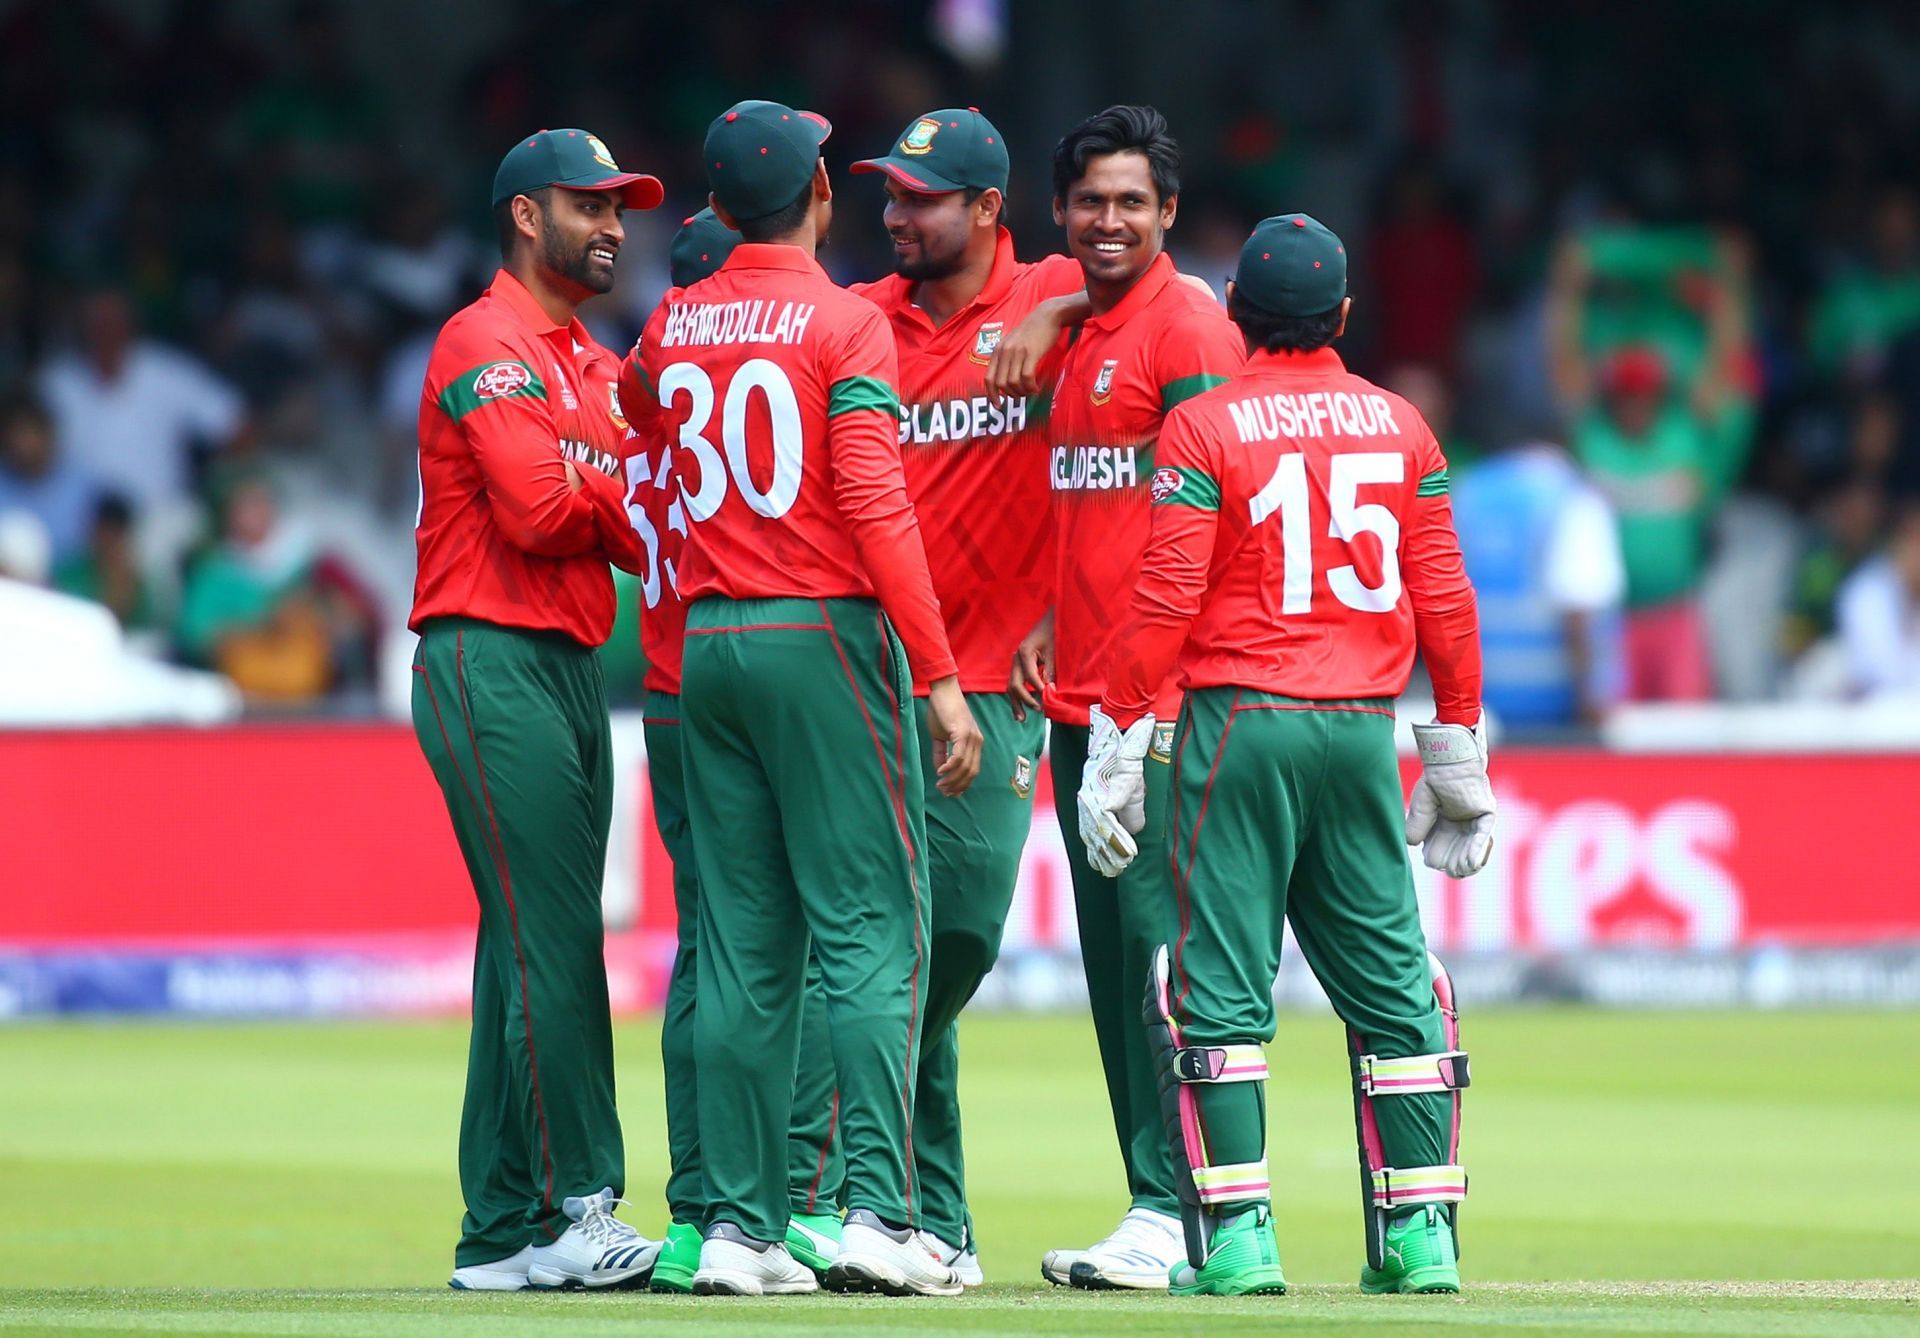 Can Bangladesh start their T20 World Cup 2021 campaign with a win?